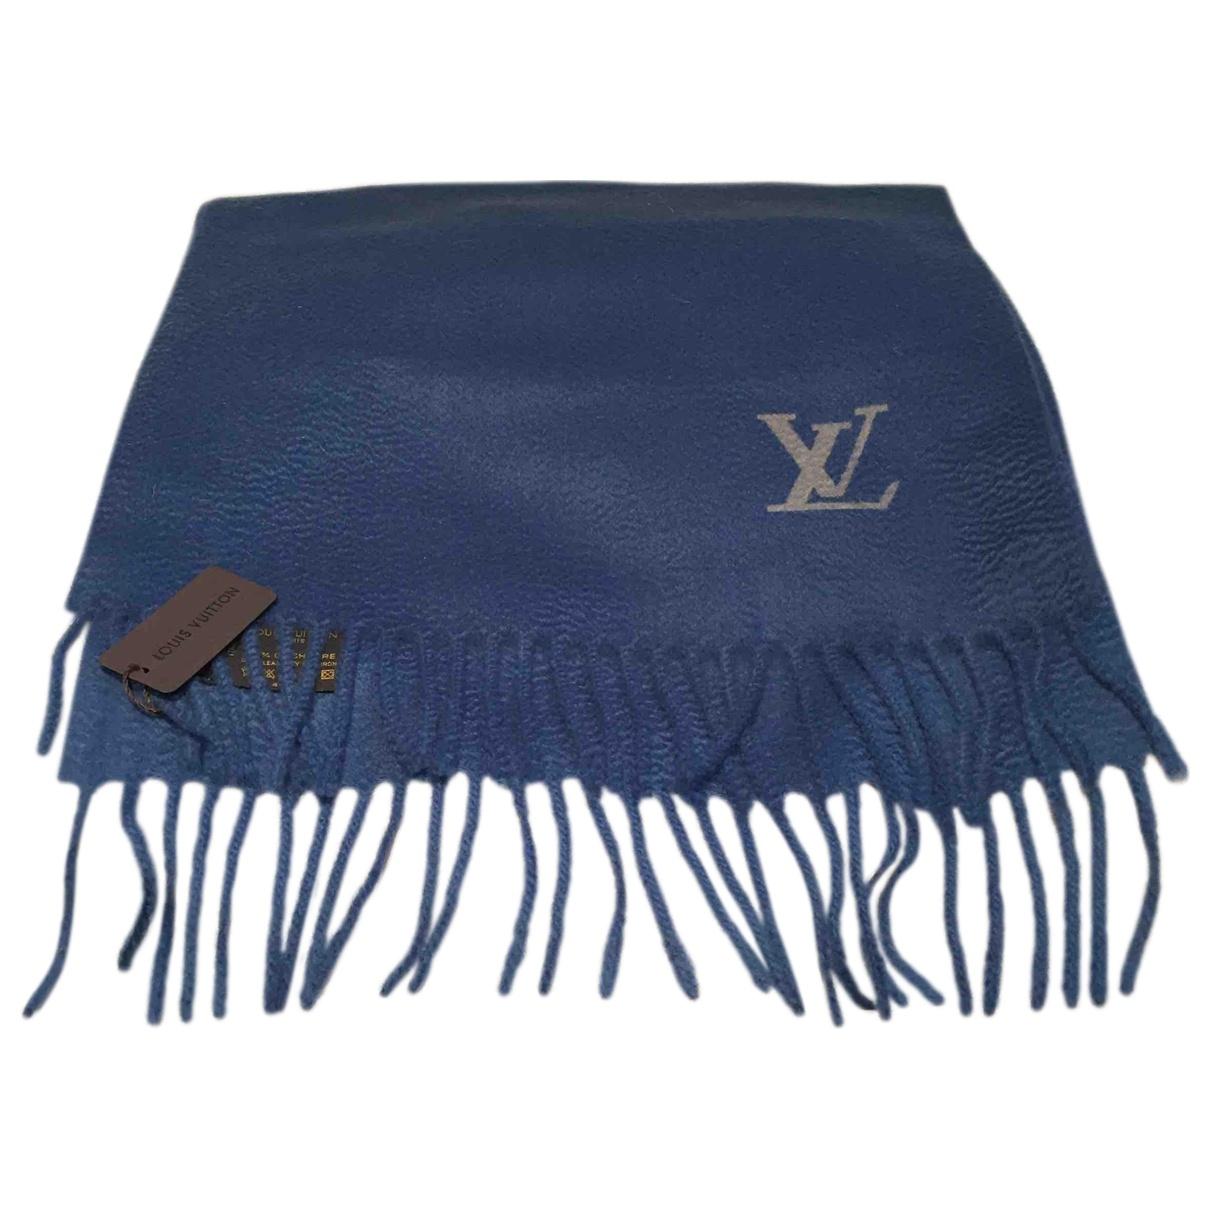 Lyst - Louis Vuitton Cashmere Scarf & Pocket Square in Blue for Men